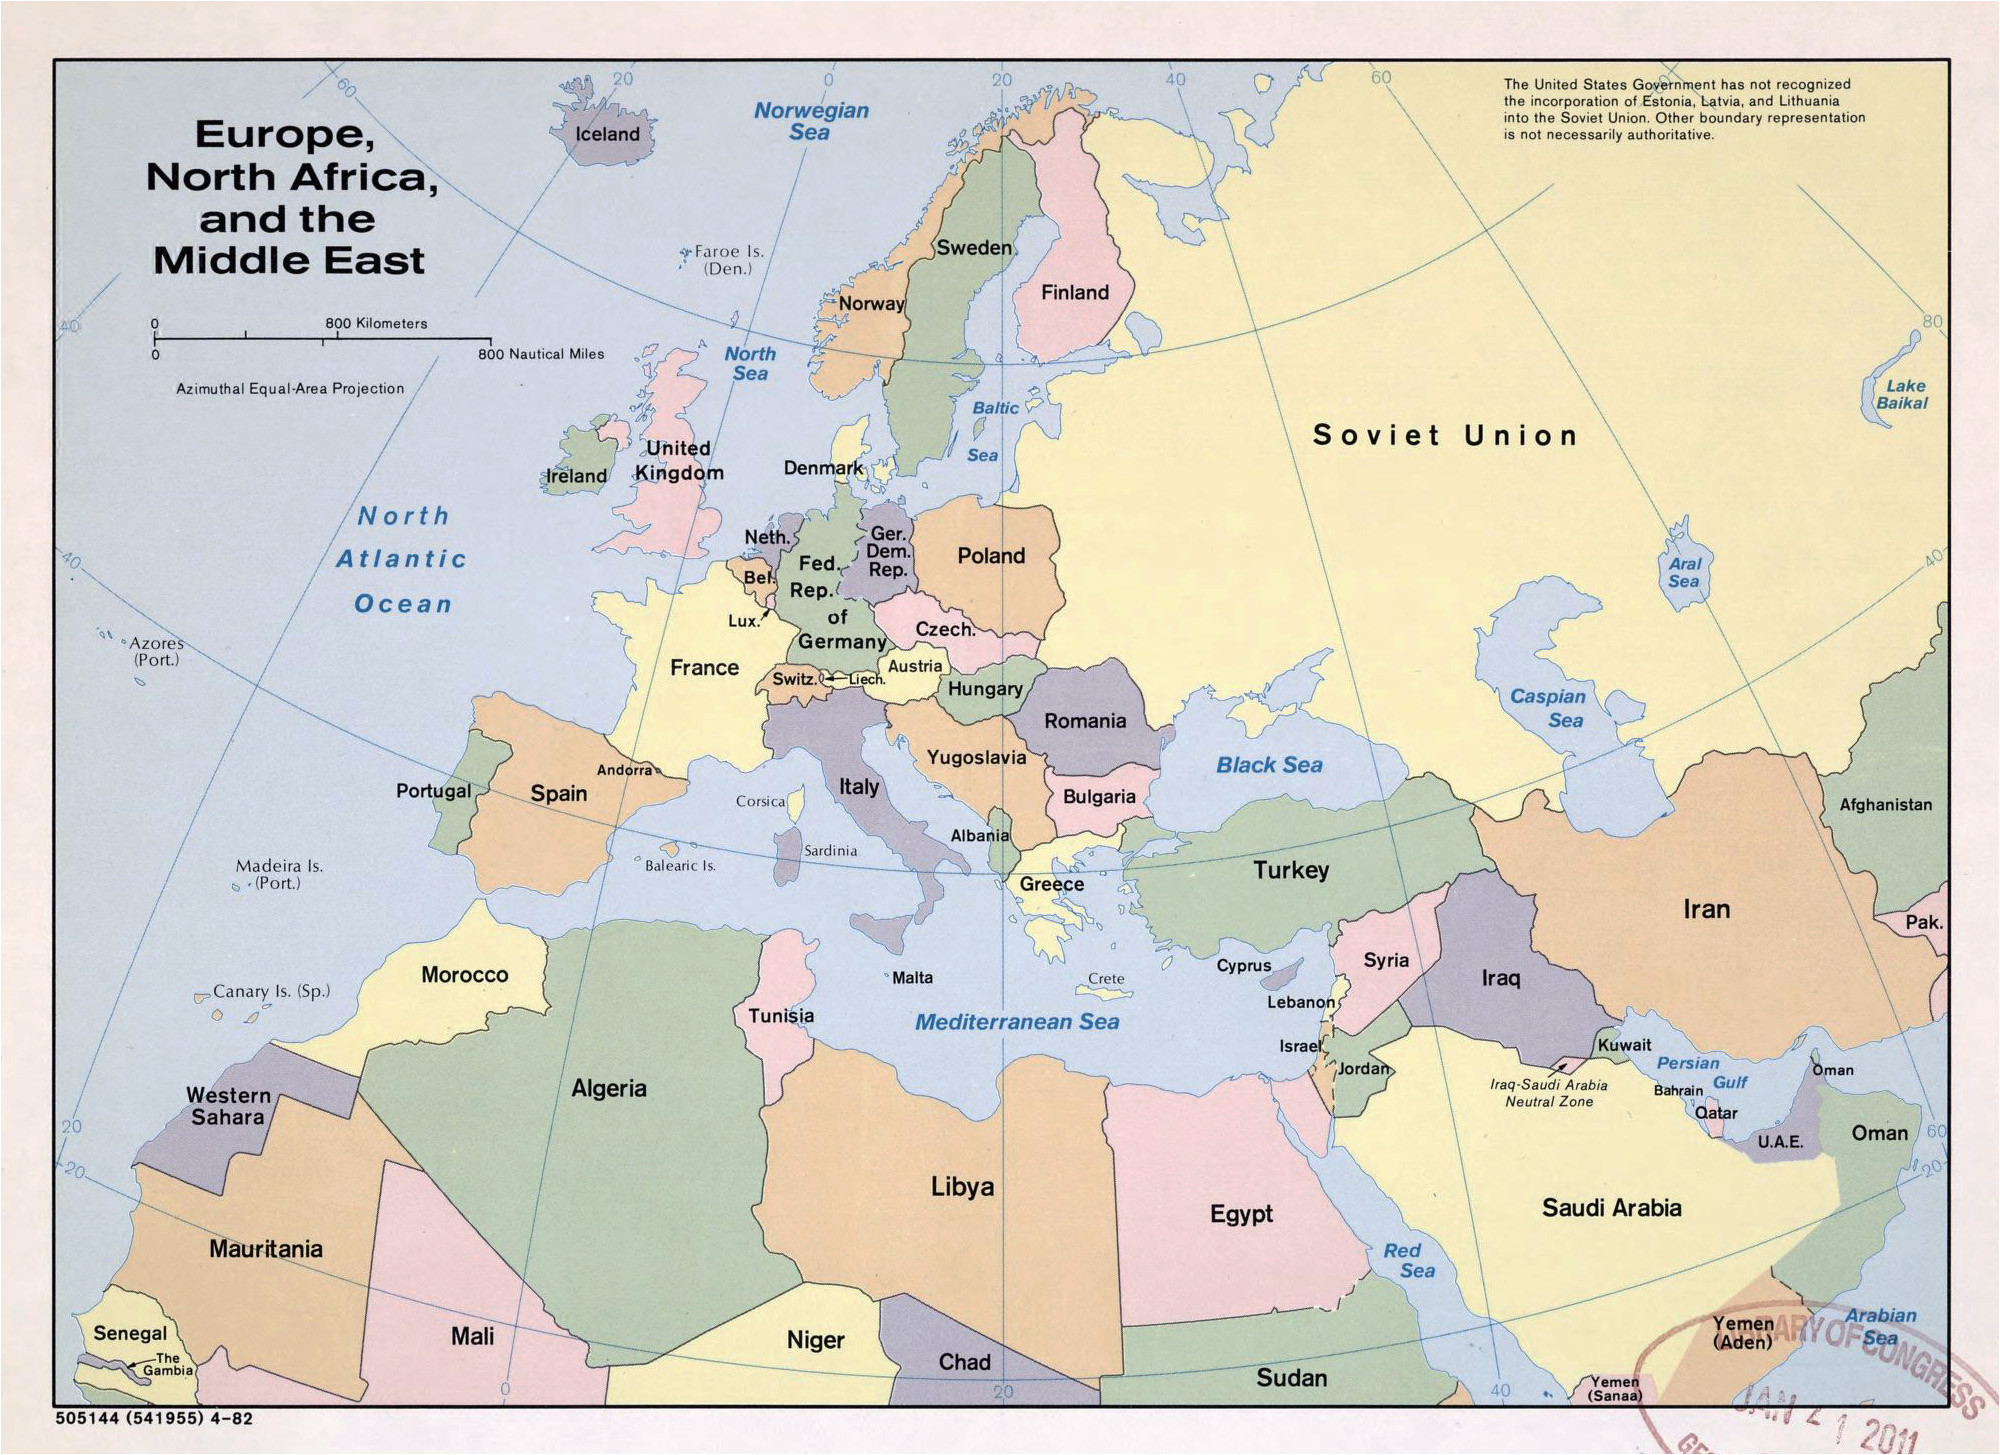 map of europe middle east and north africa map of africa